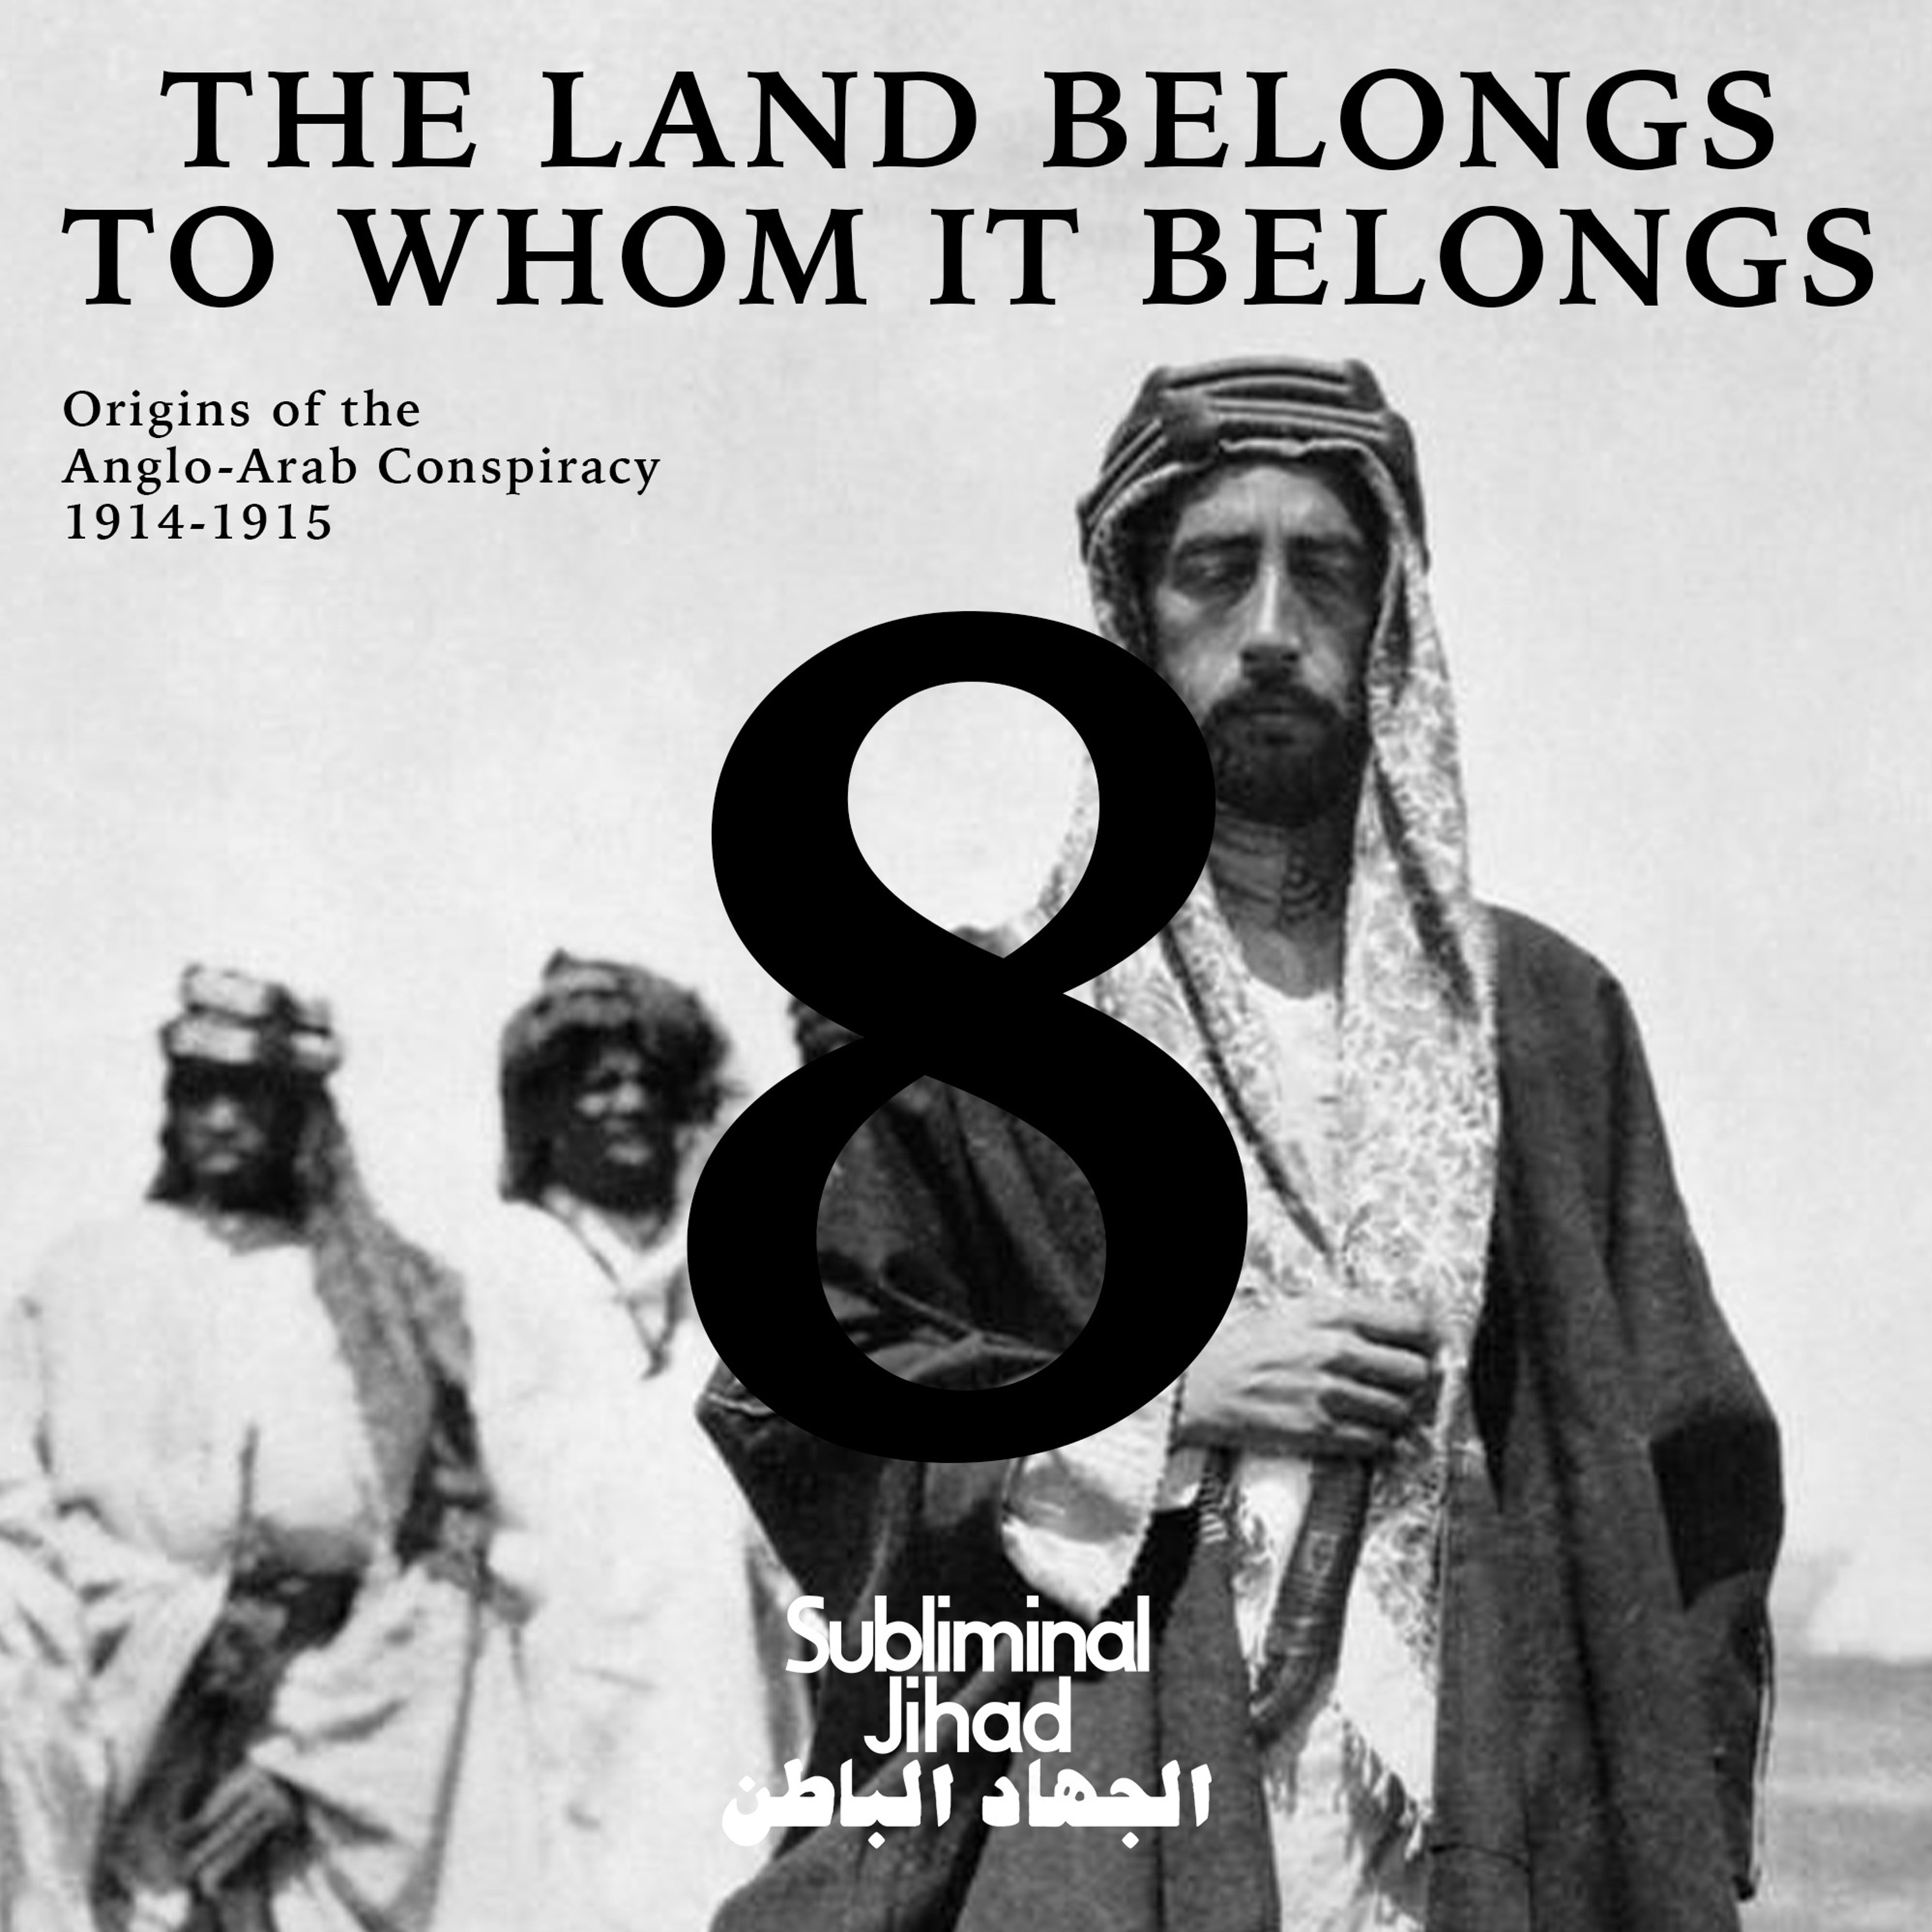 [#183] THE LAND BELONGS TO WHOM IT BELONGS, Part 8: Origins of the Anglo-Arab Conspiracy, 1914-15